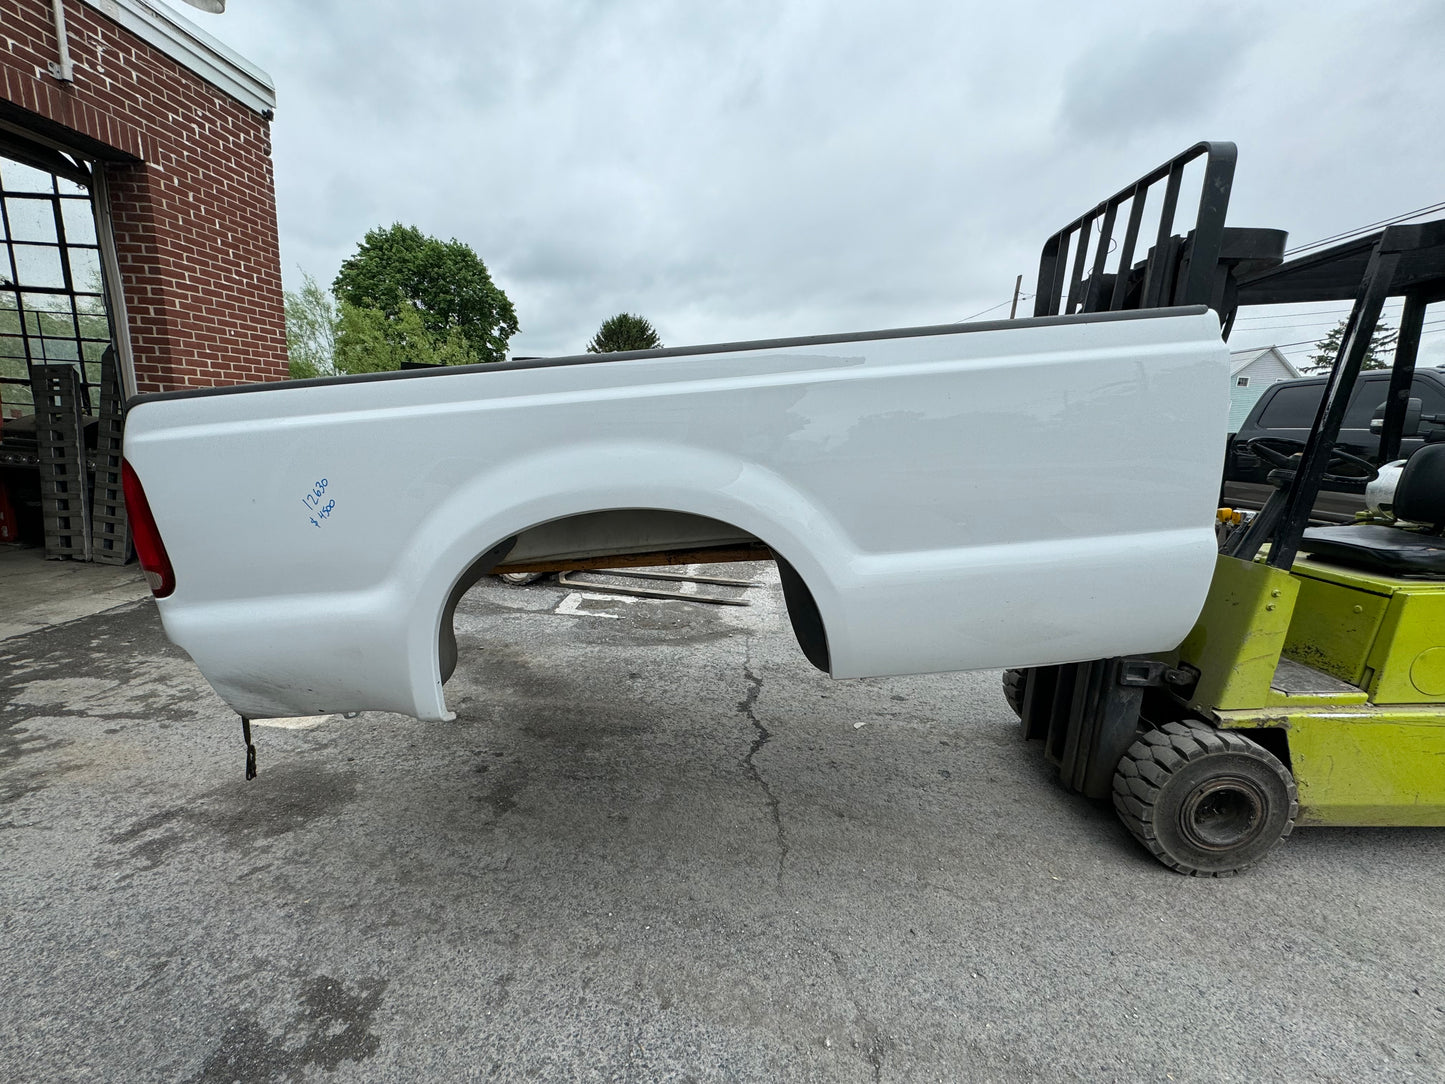 1999-2010 Superduty 8’ bed Oxford white #12630